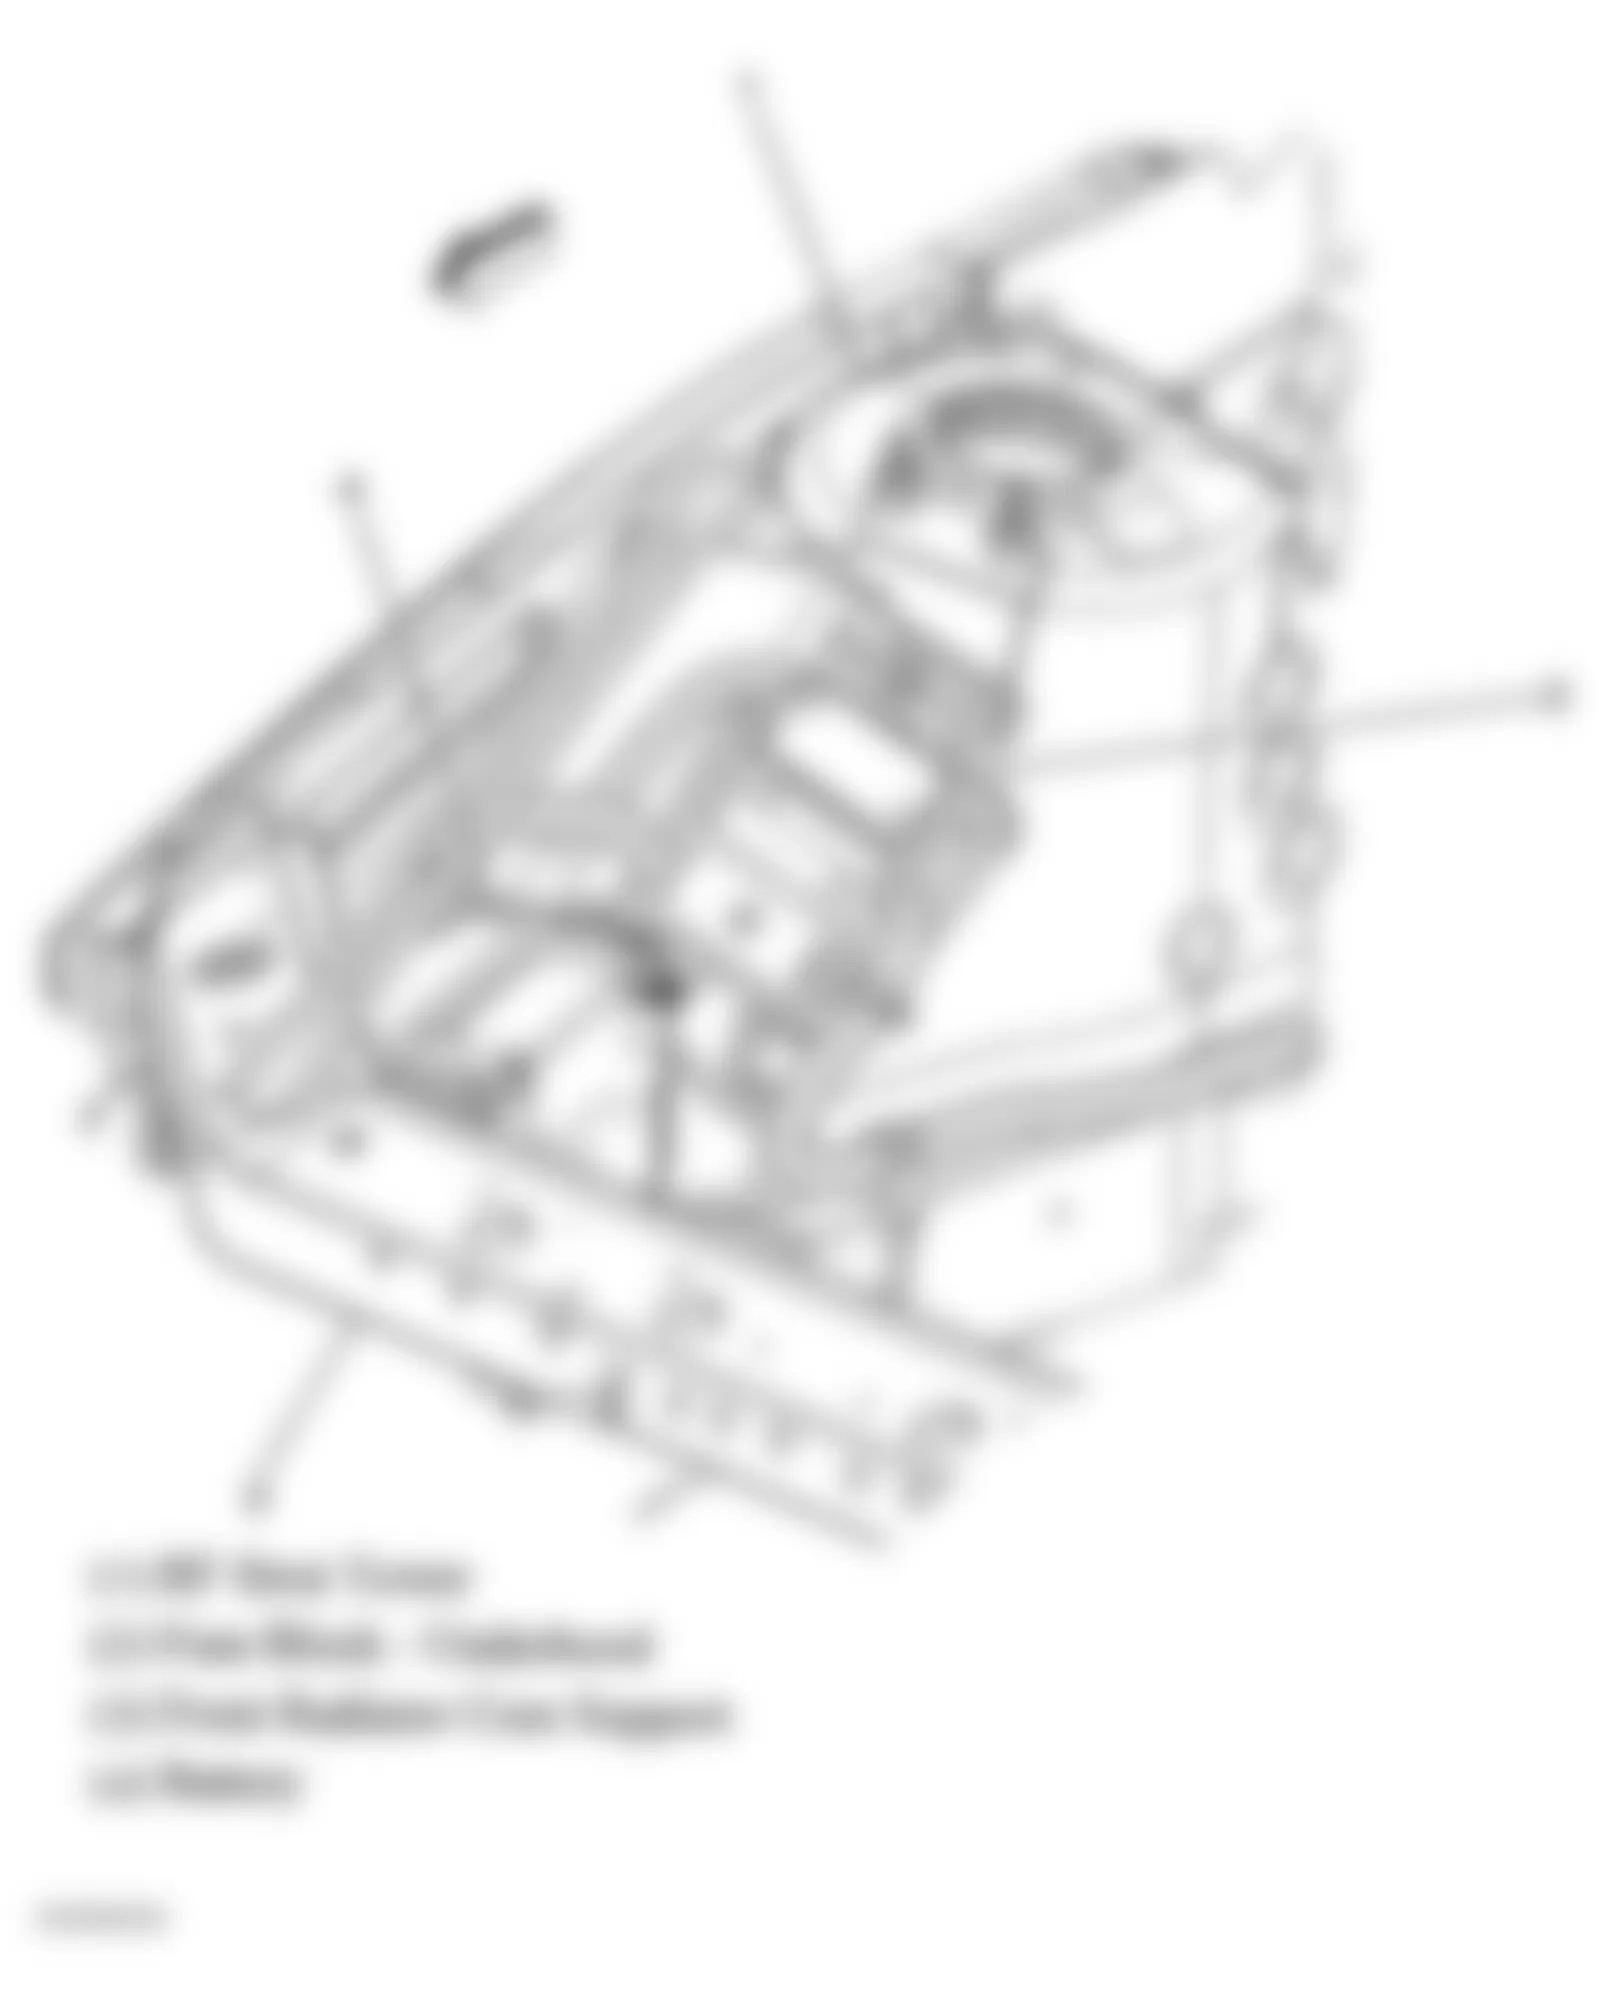 Buick Allure CXL 2005 - Component Locations -  Right Front Of Engine Compartment